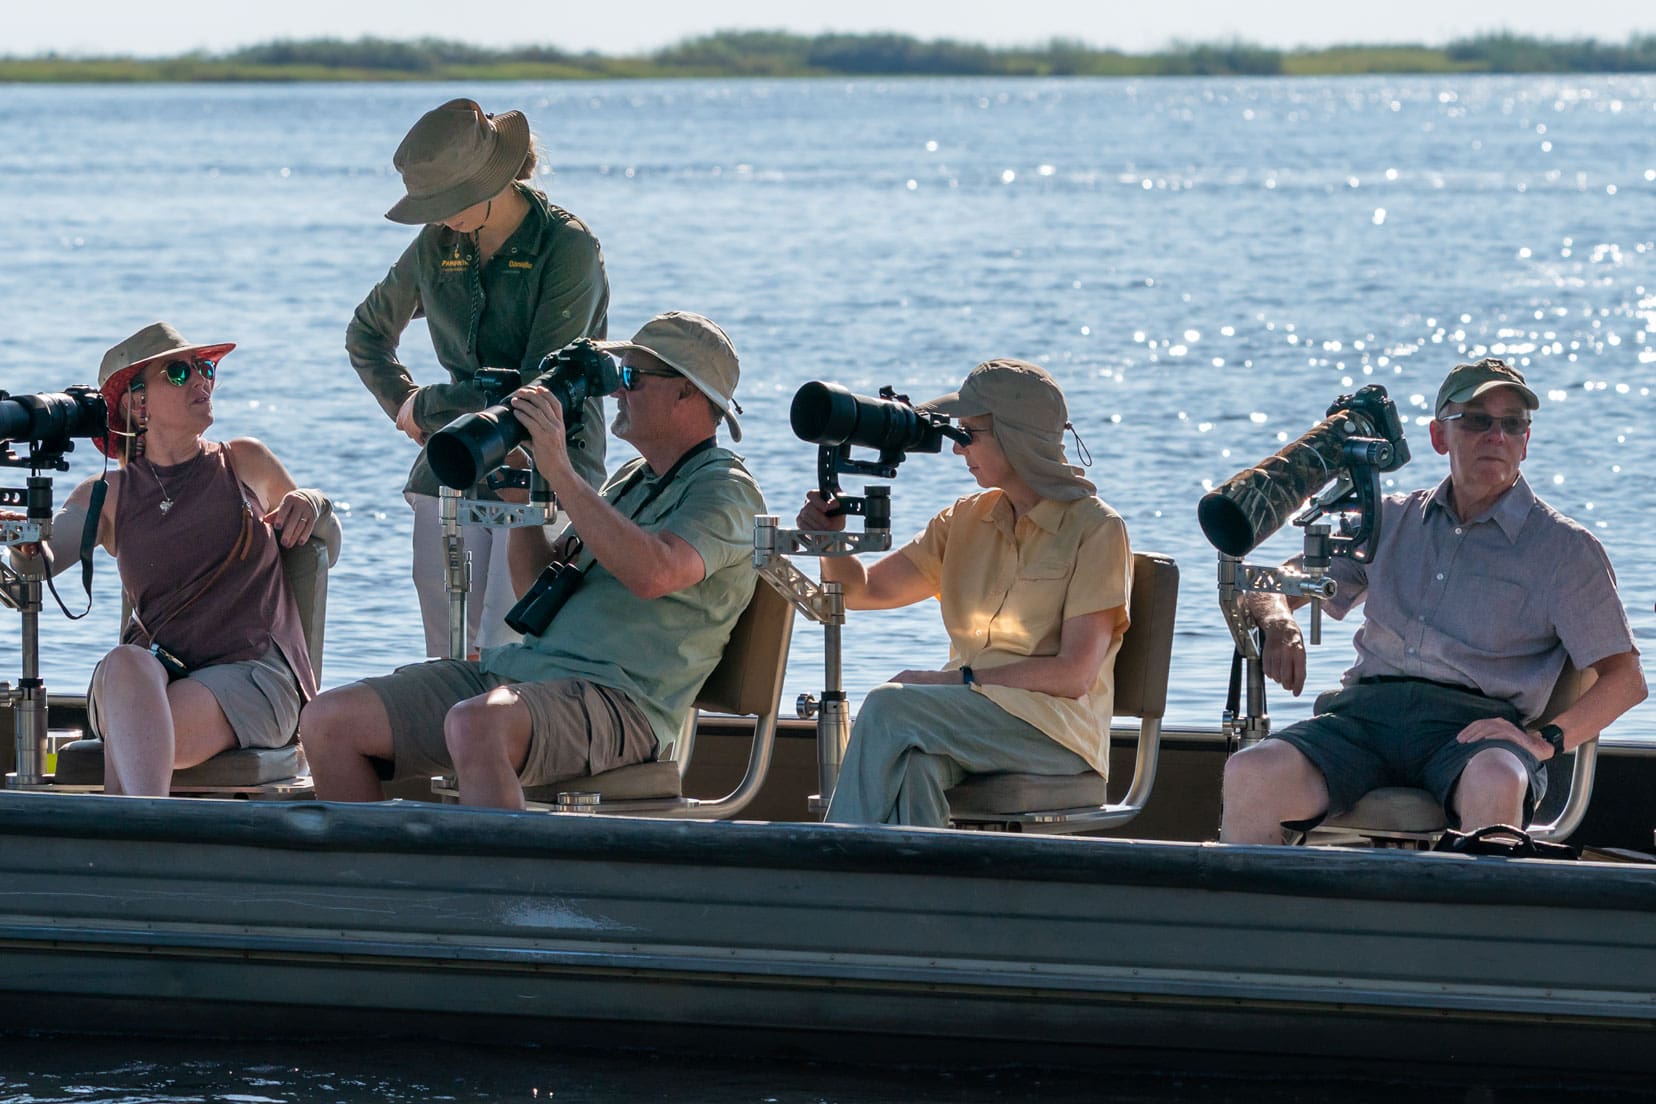 boat-with-many gimbals and camera with lenses in place